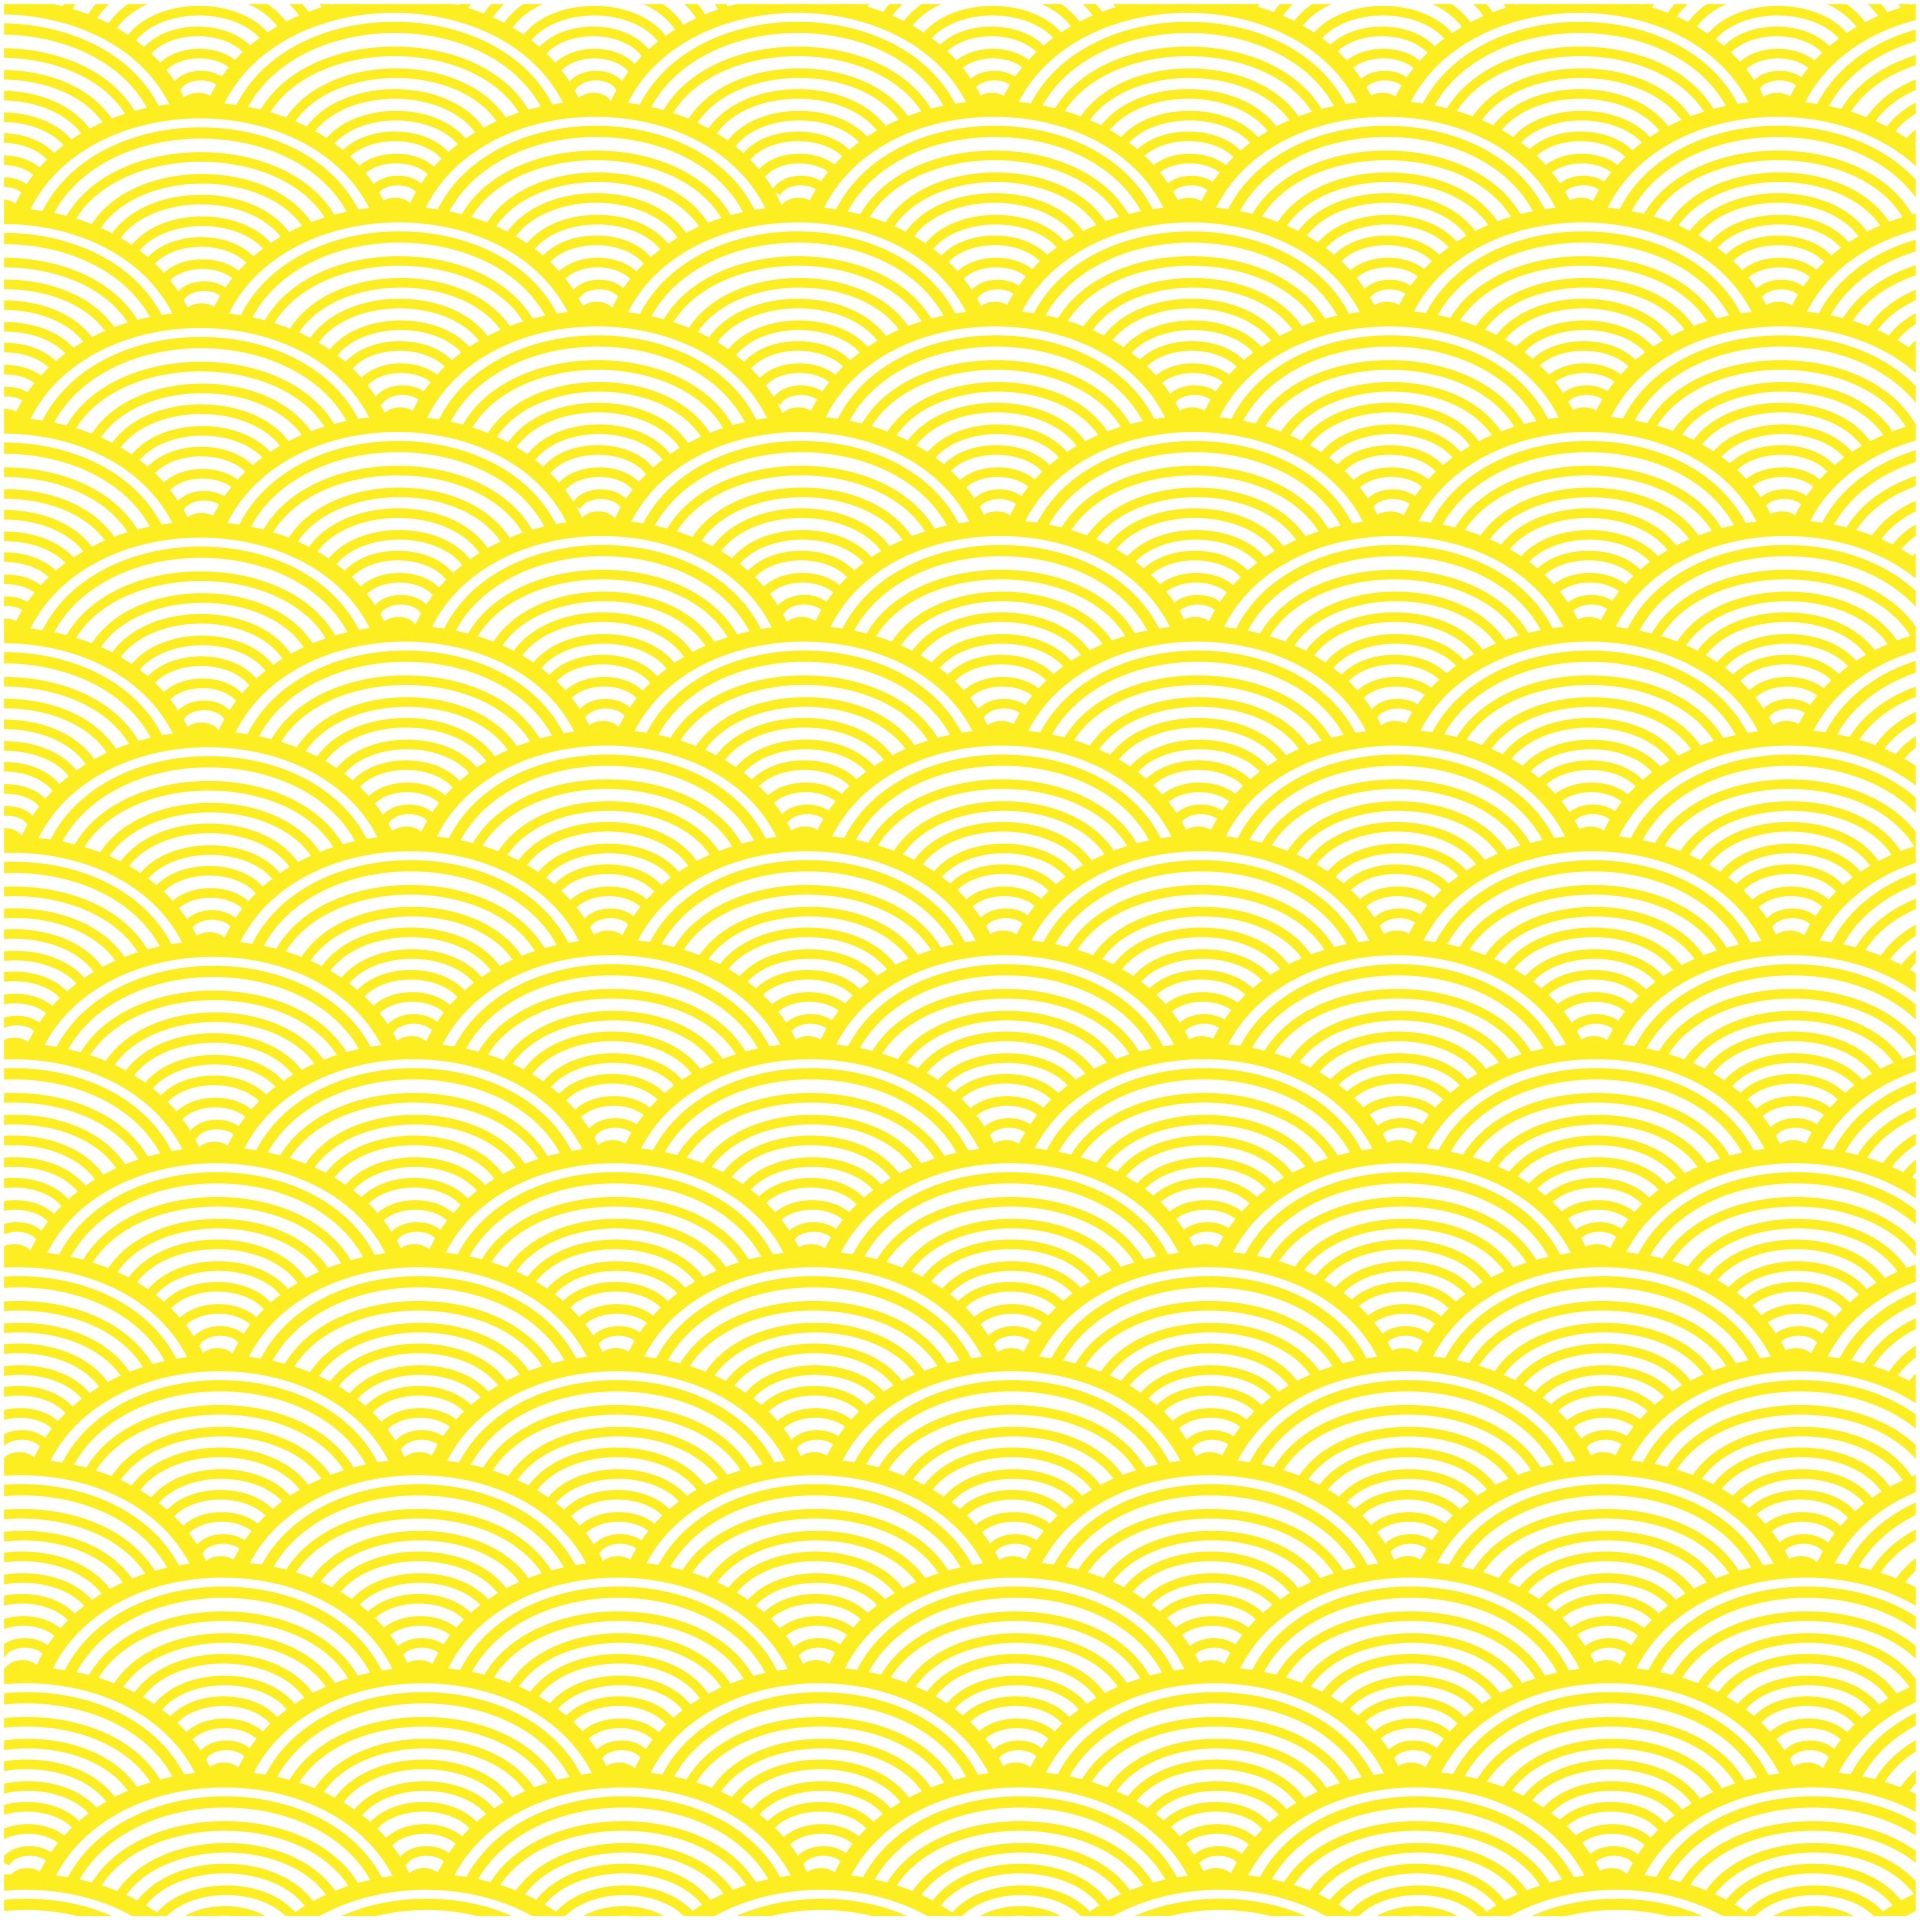 Japanese wave Wave Scallop Free Photo - Yellow Japanese Waves Background - HD Wallpaper 